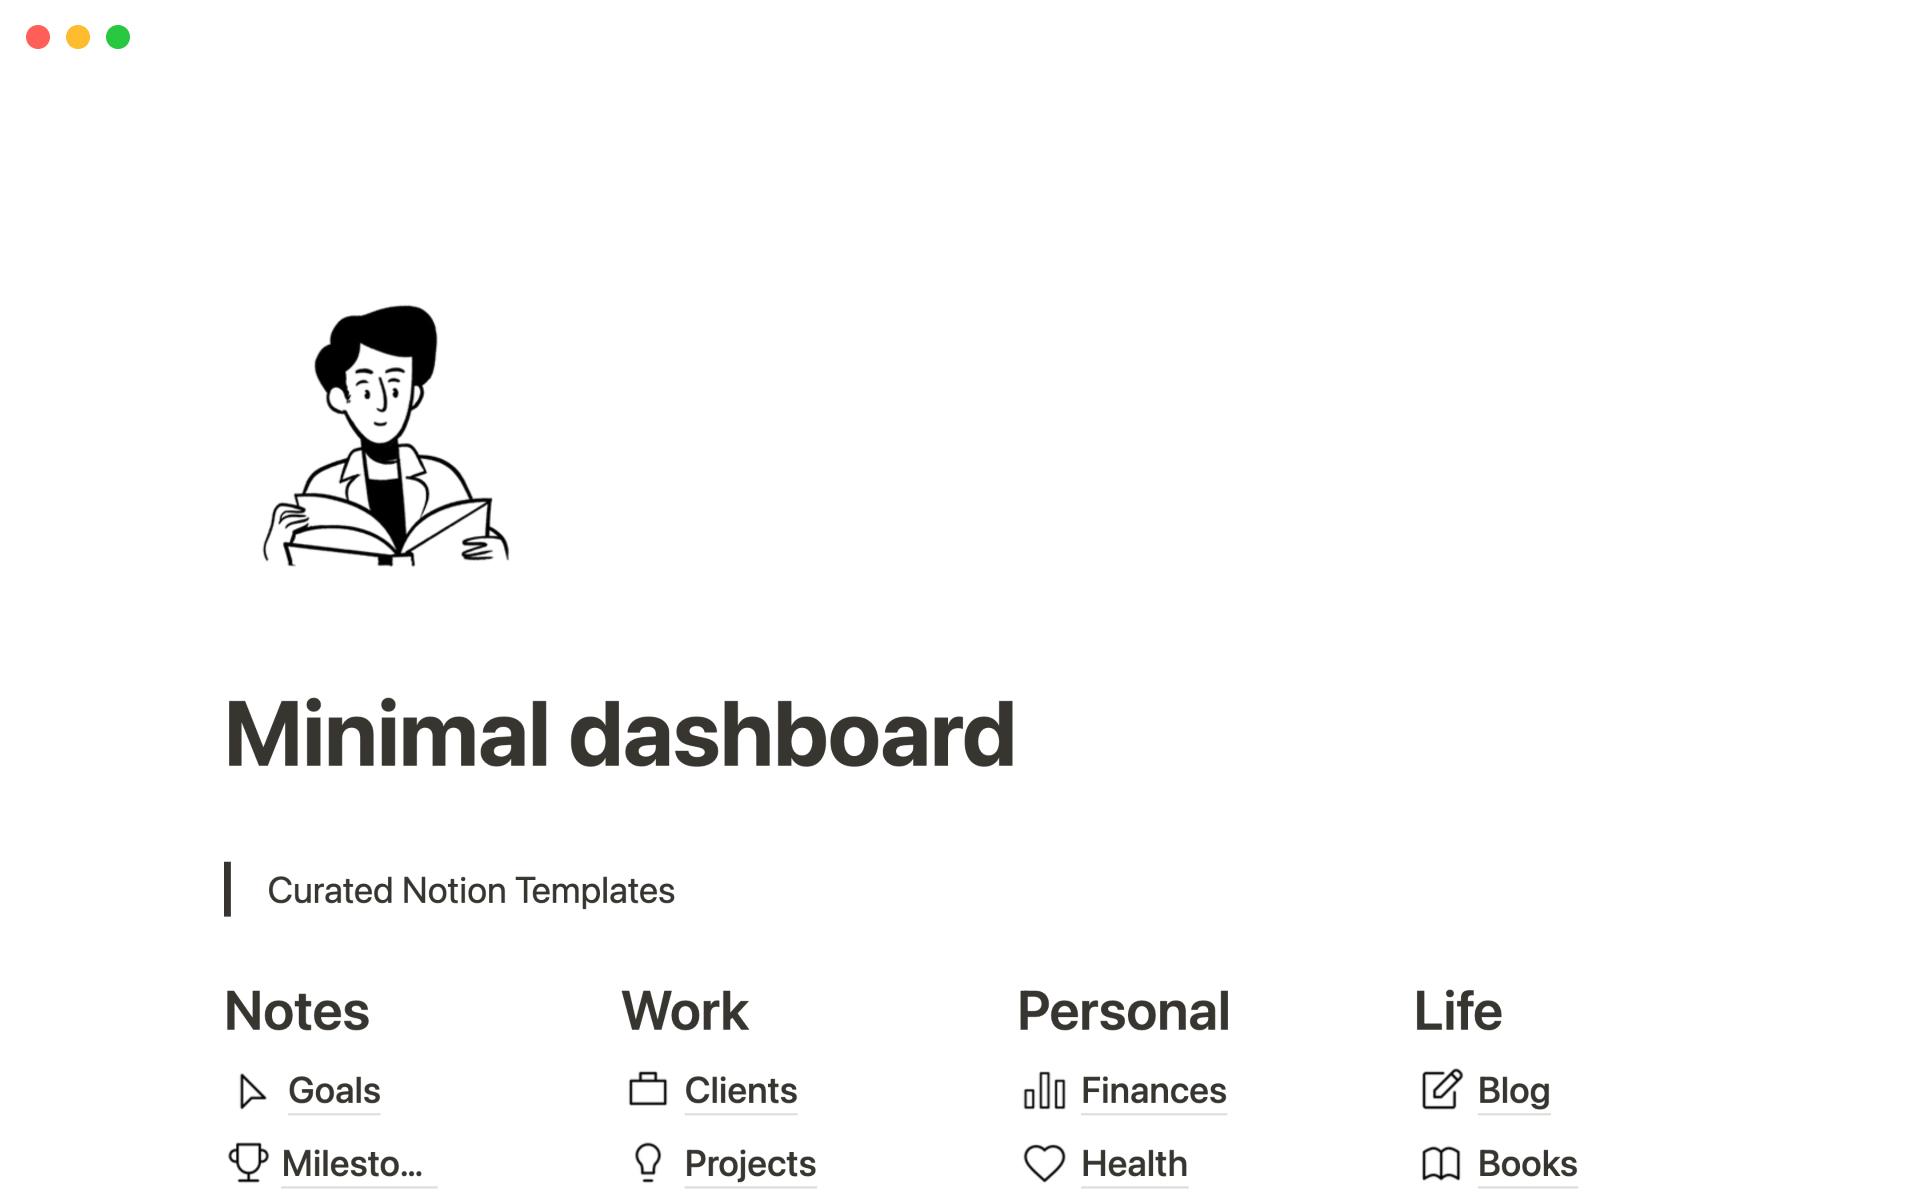 Minimal Dashboard Template helps you organize all your note into one page.